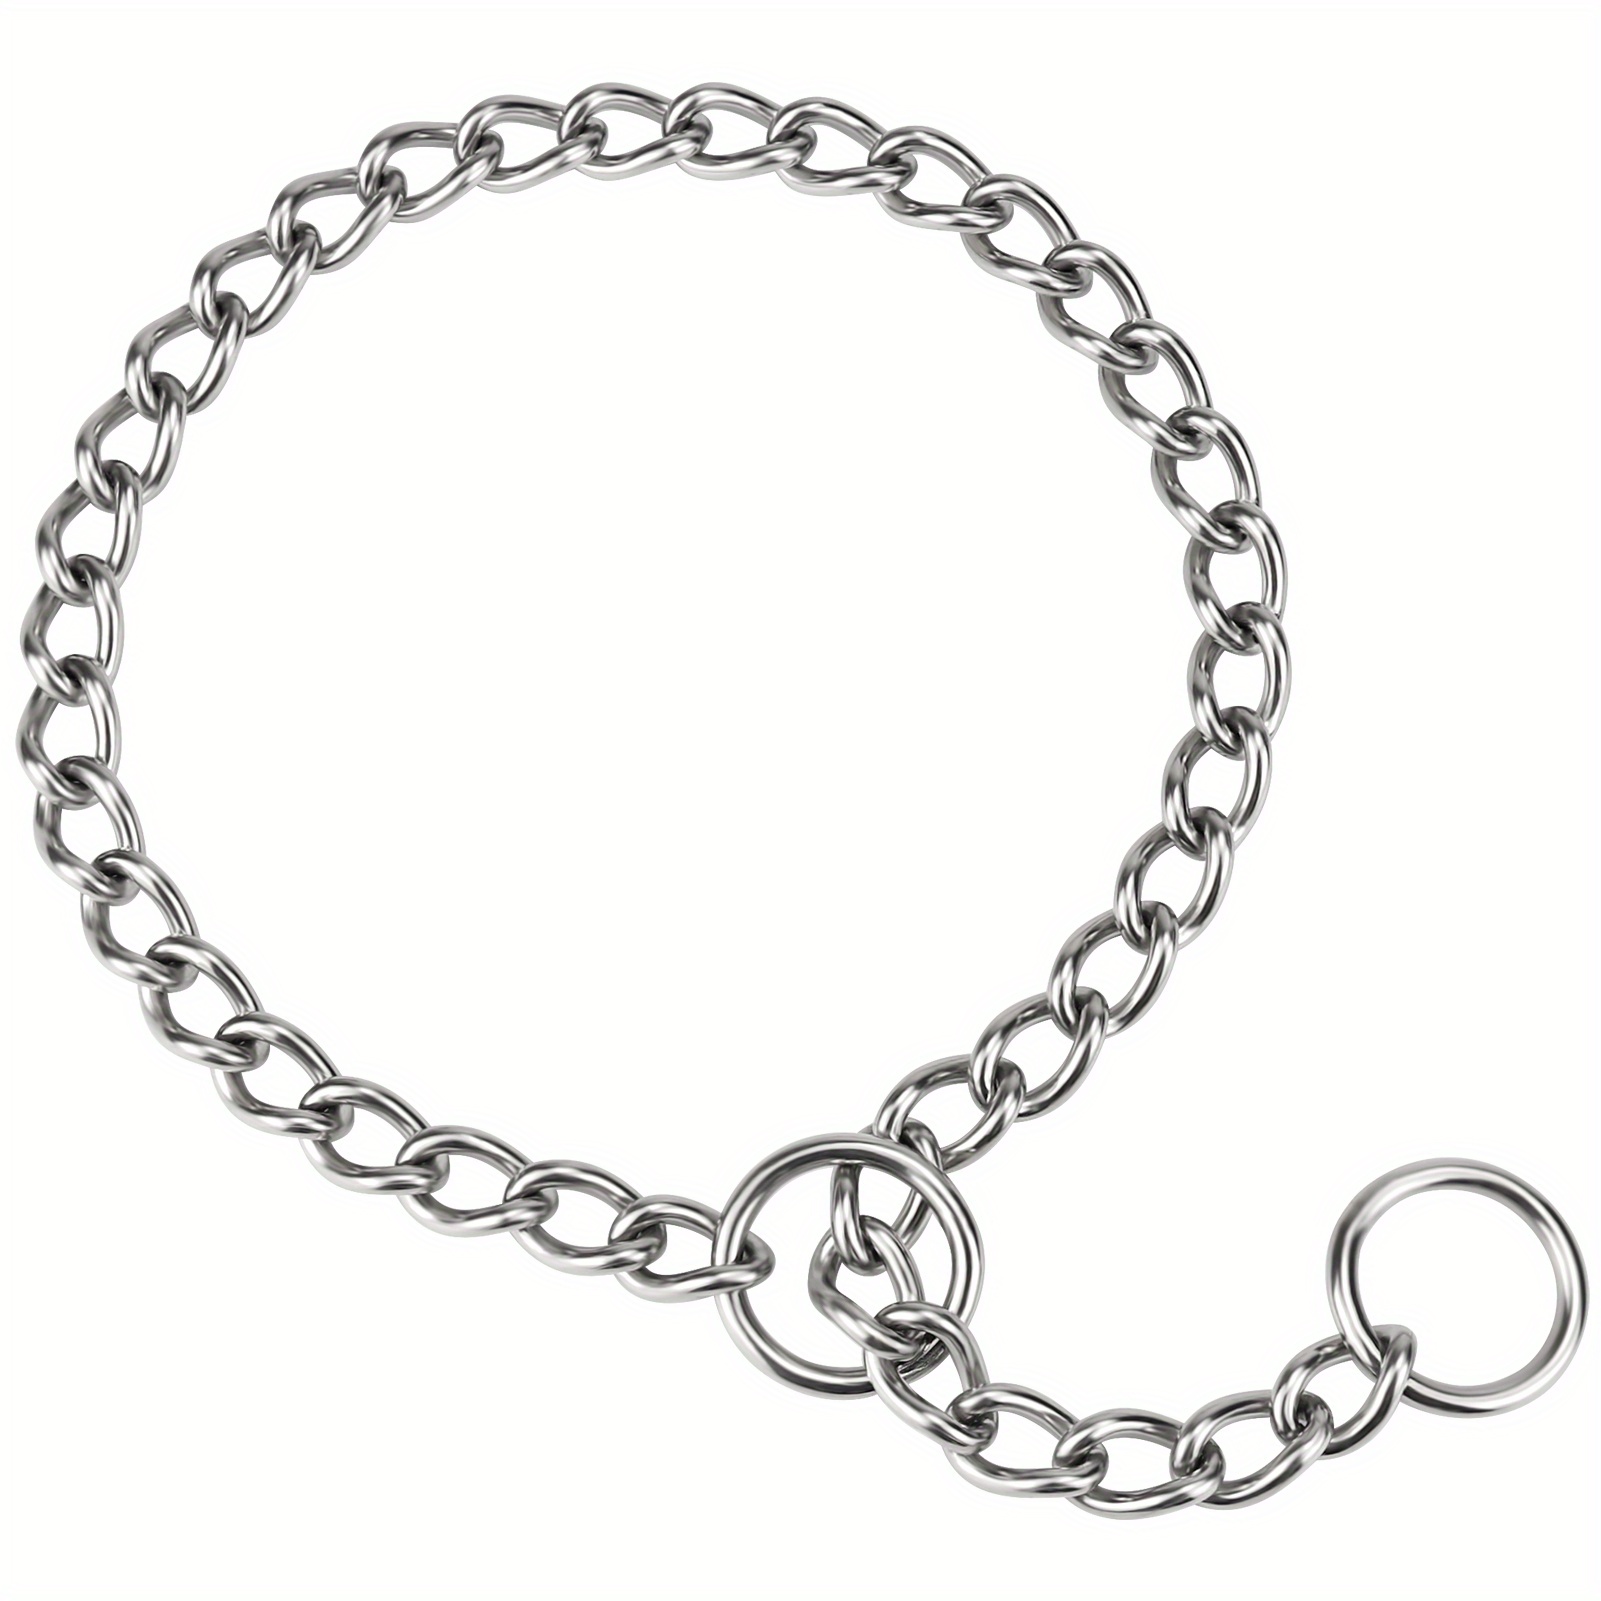 Stainless Steel Dog Chain Gold Dog Collar Choker Pet Supplies Accessory  Rope